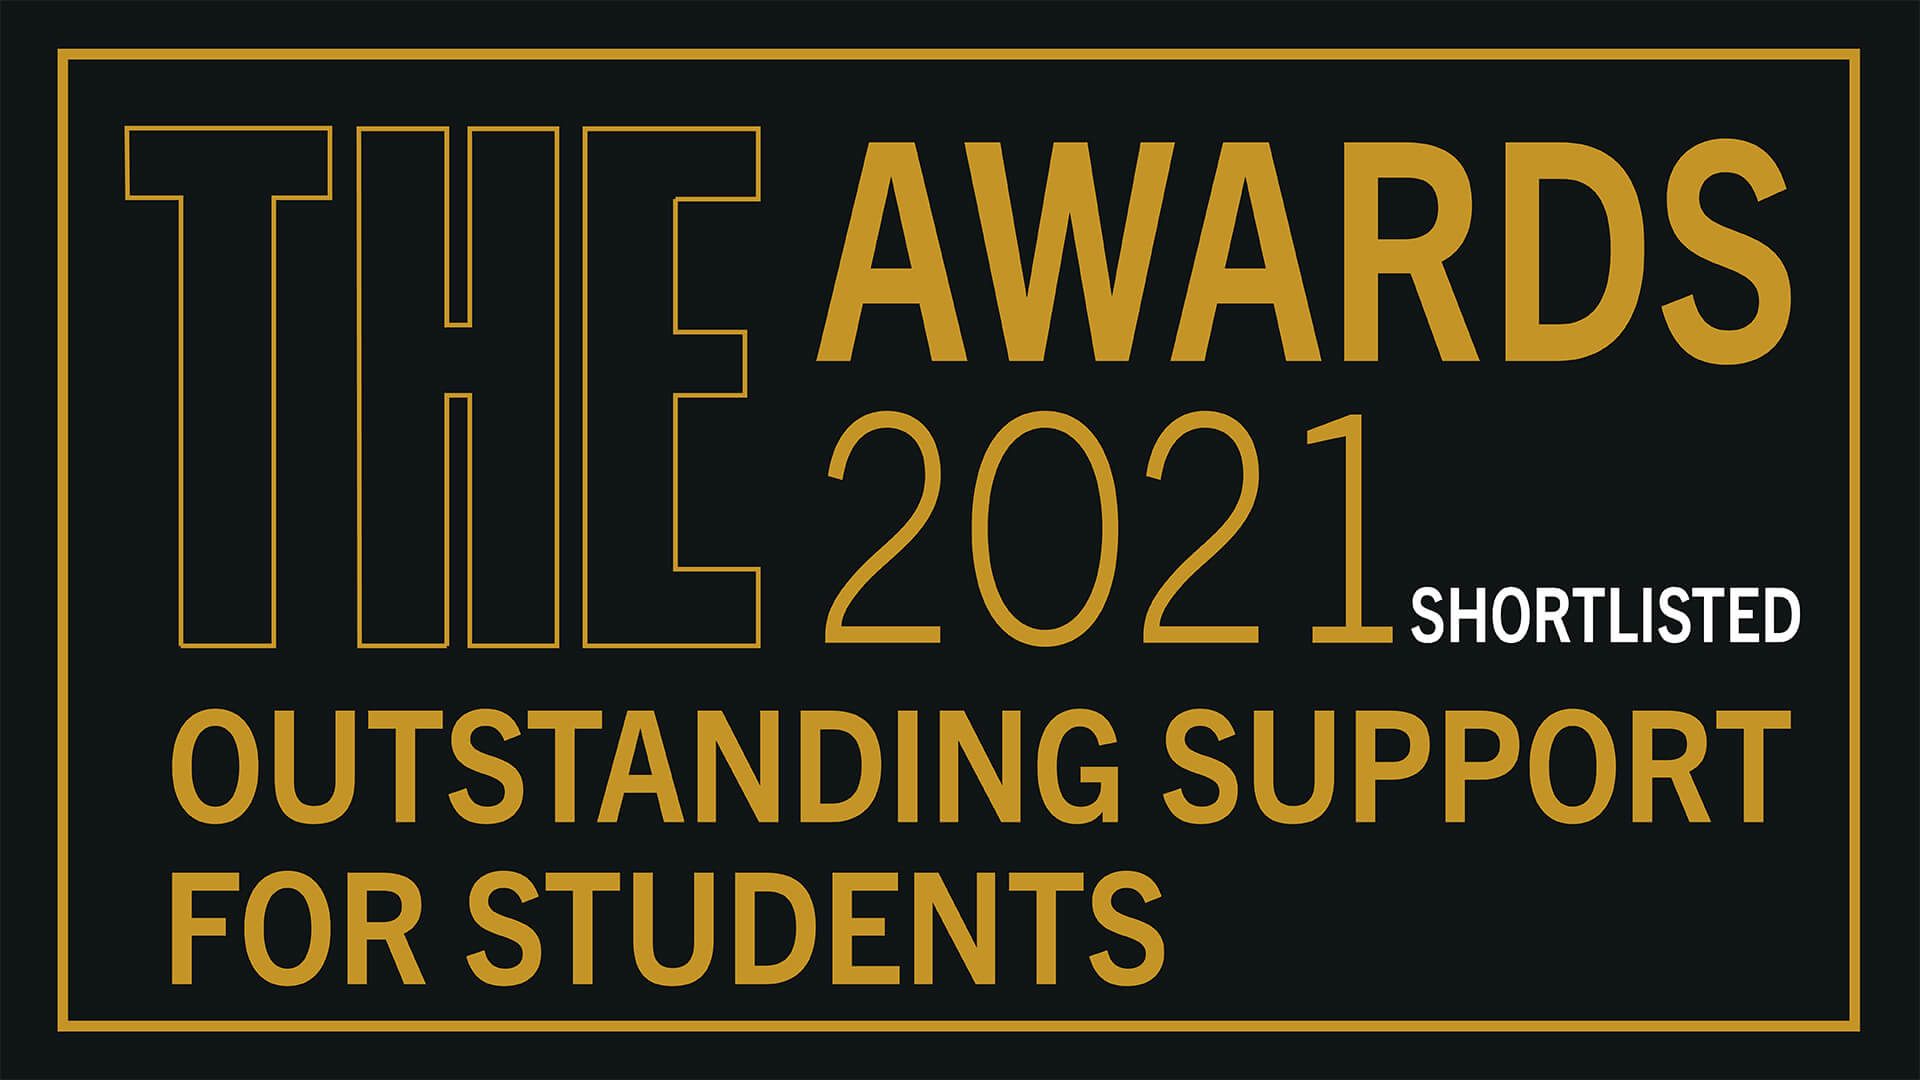 Times Higher Education Awards 2021 Shortlisted for Outstanding Support for Students logo